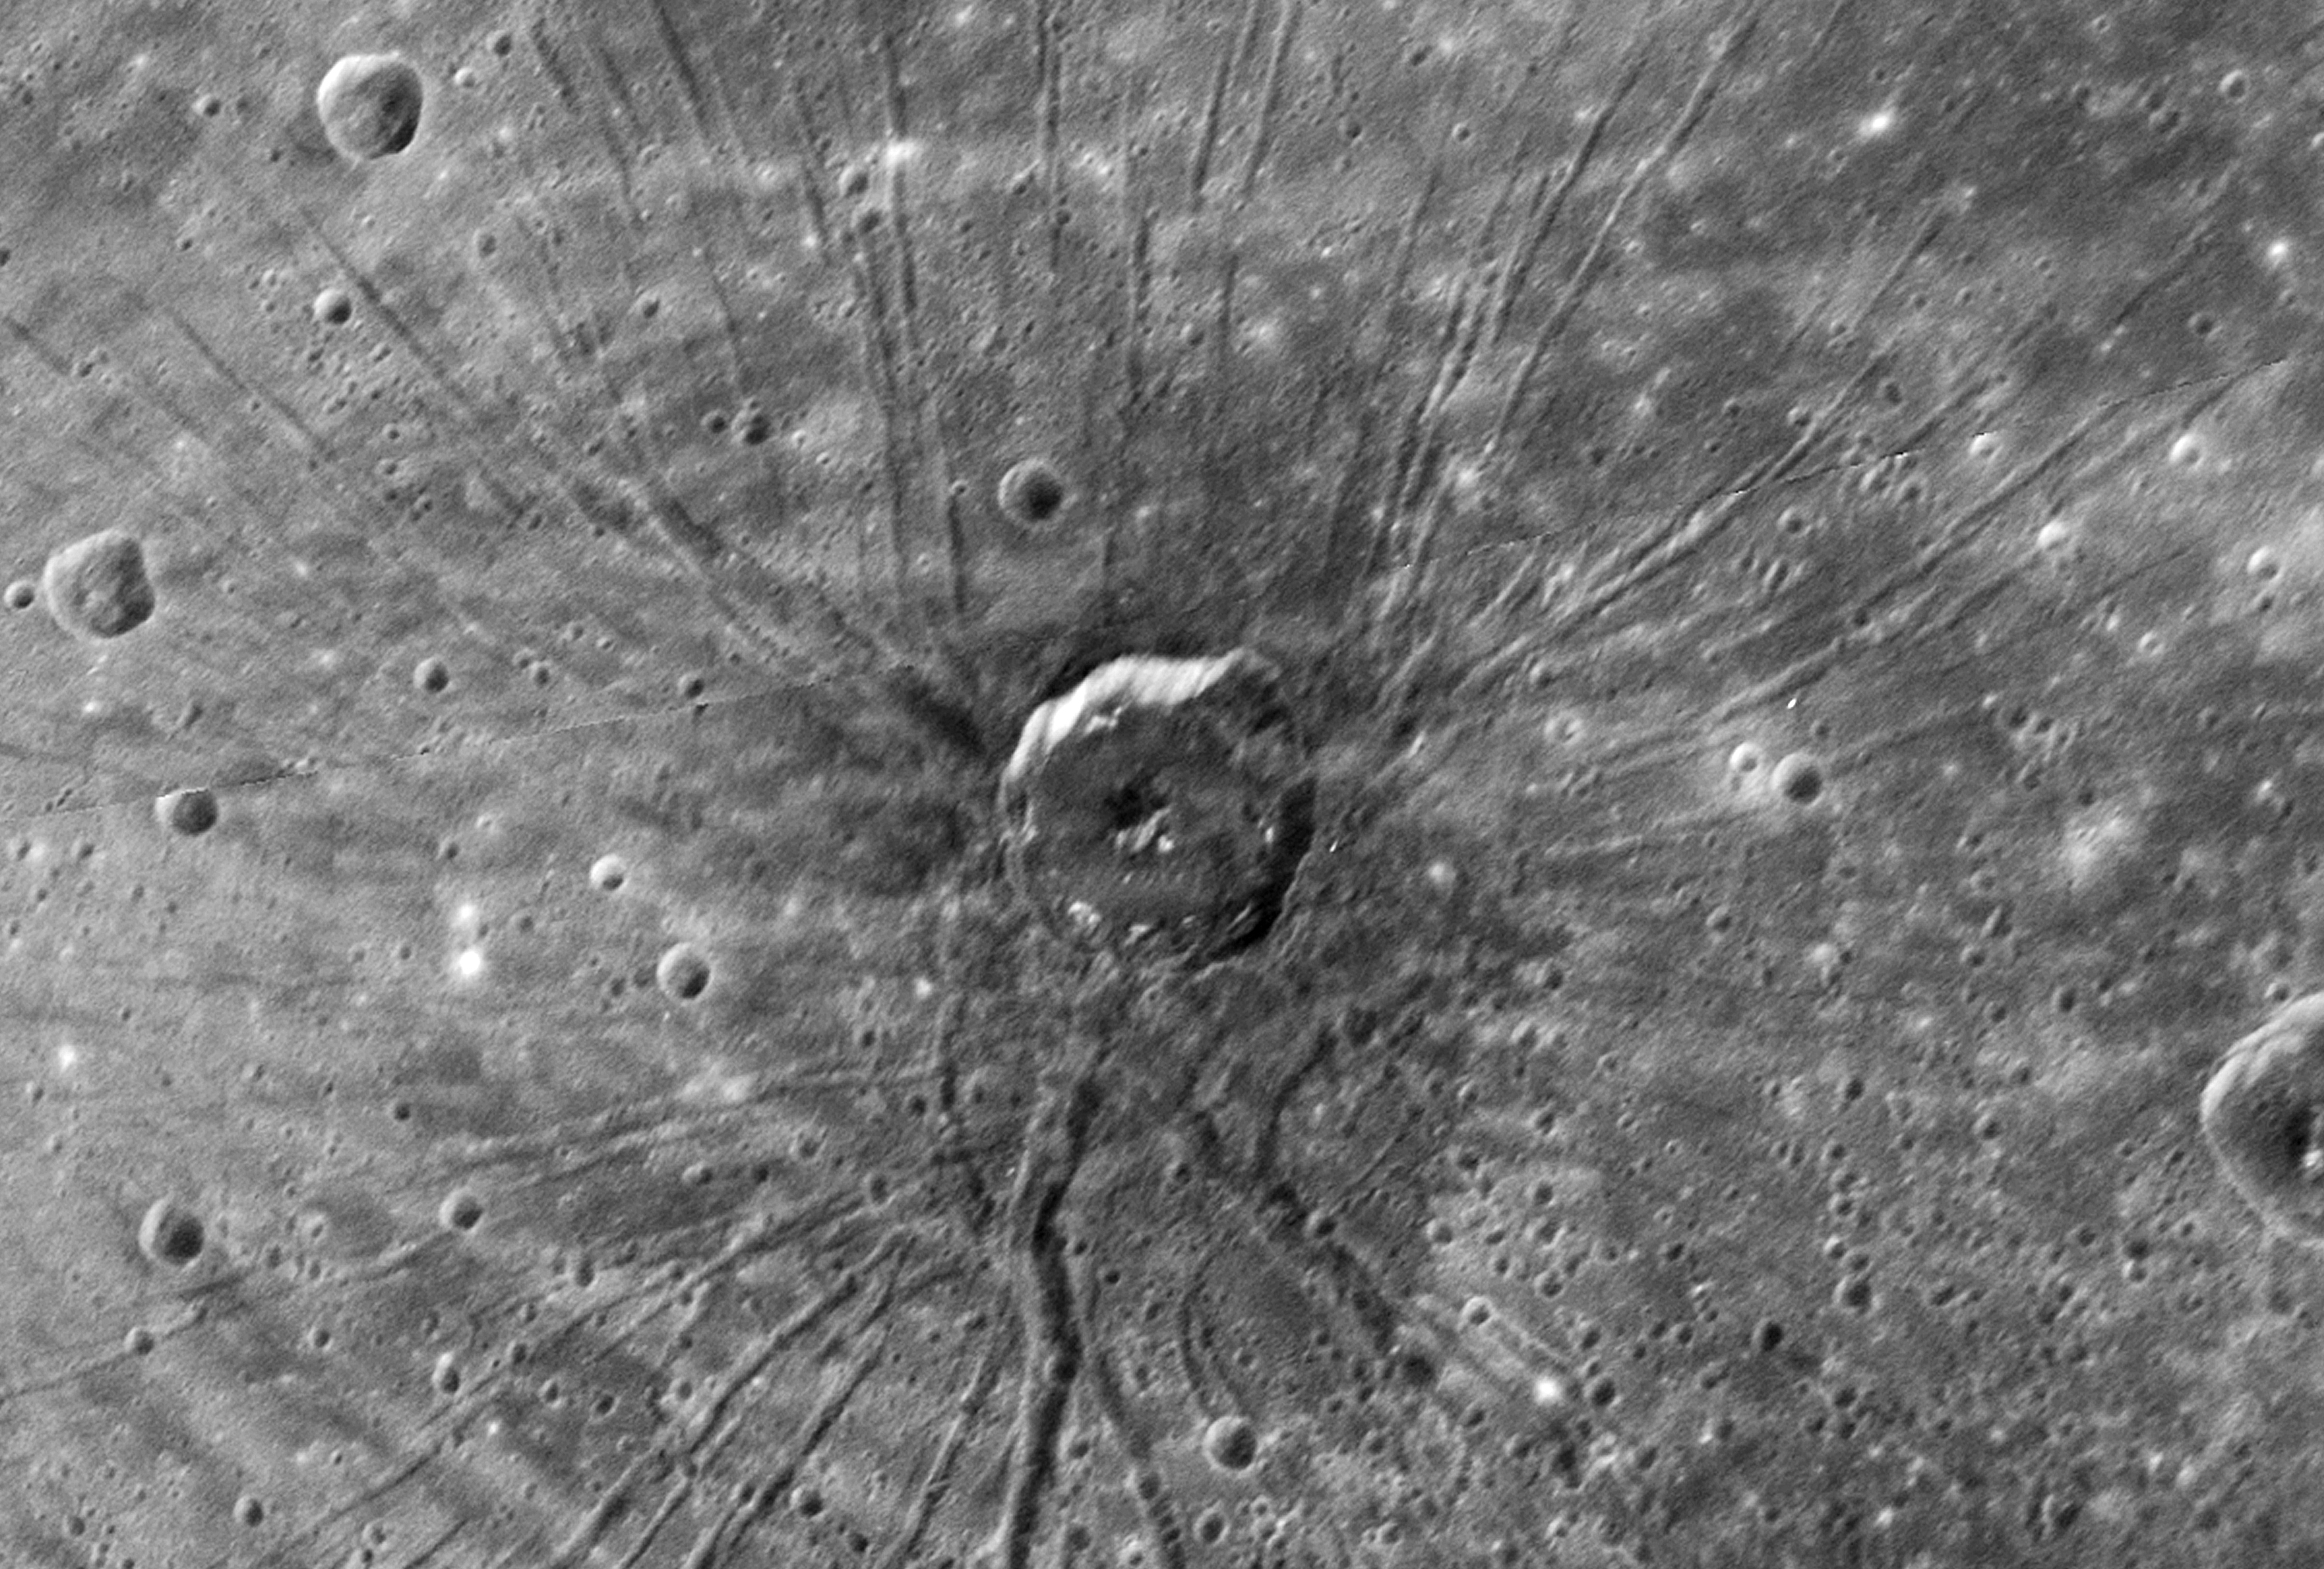 A Spider Shaped Crater on Mercury